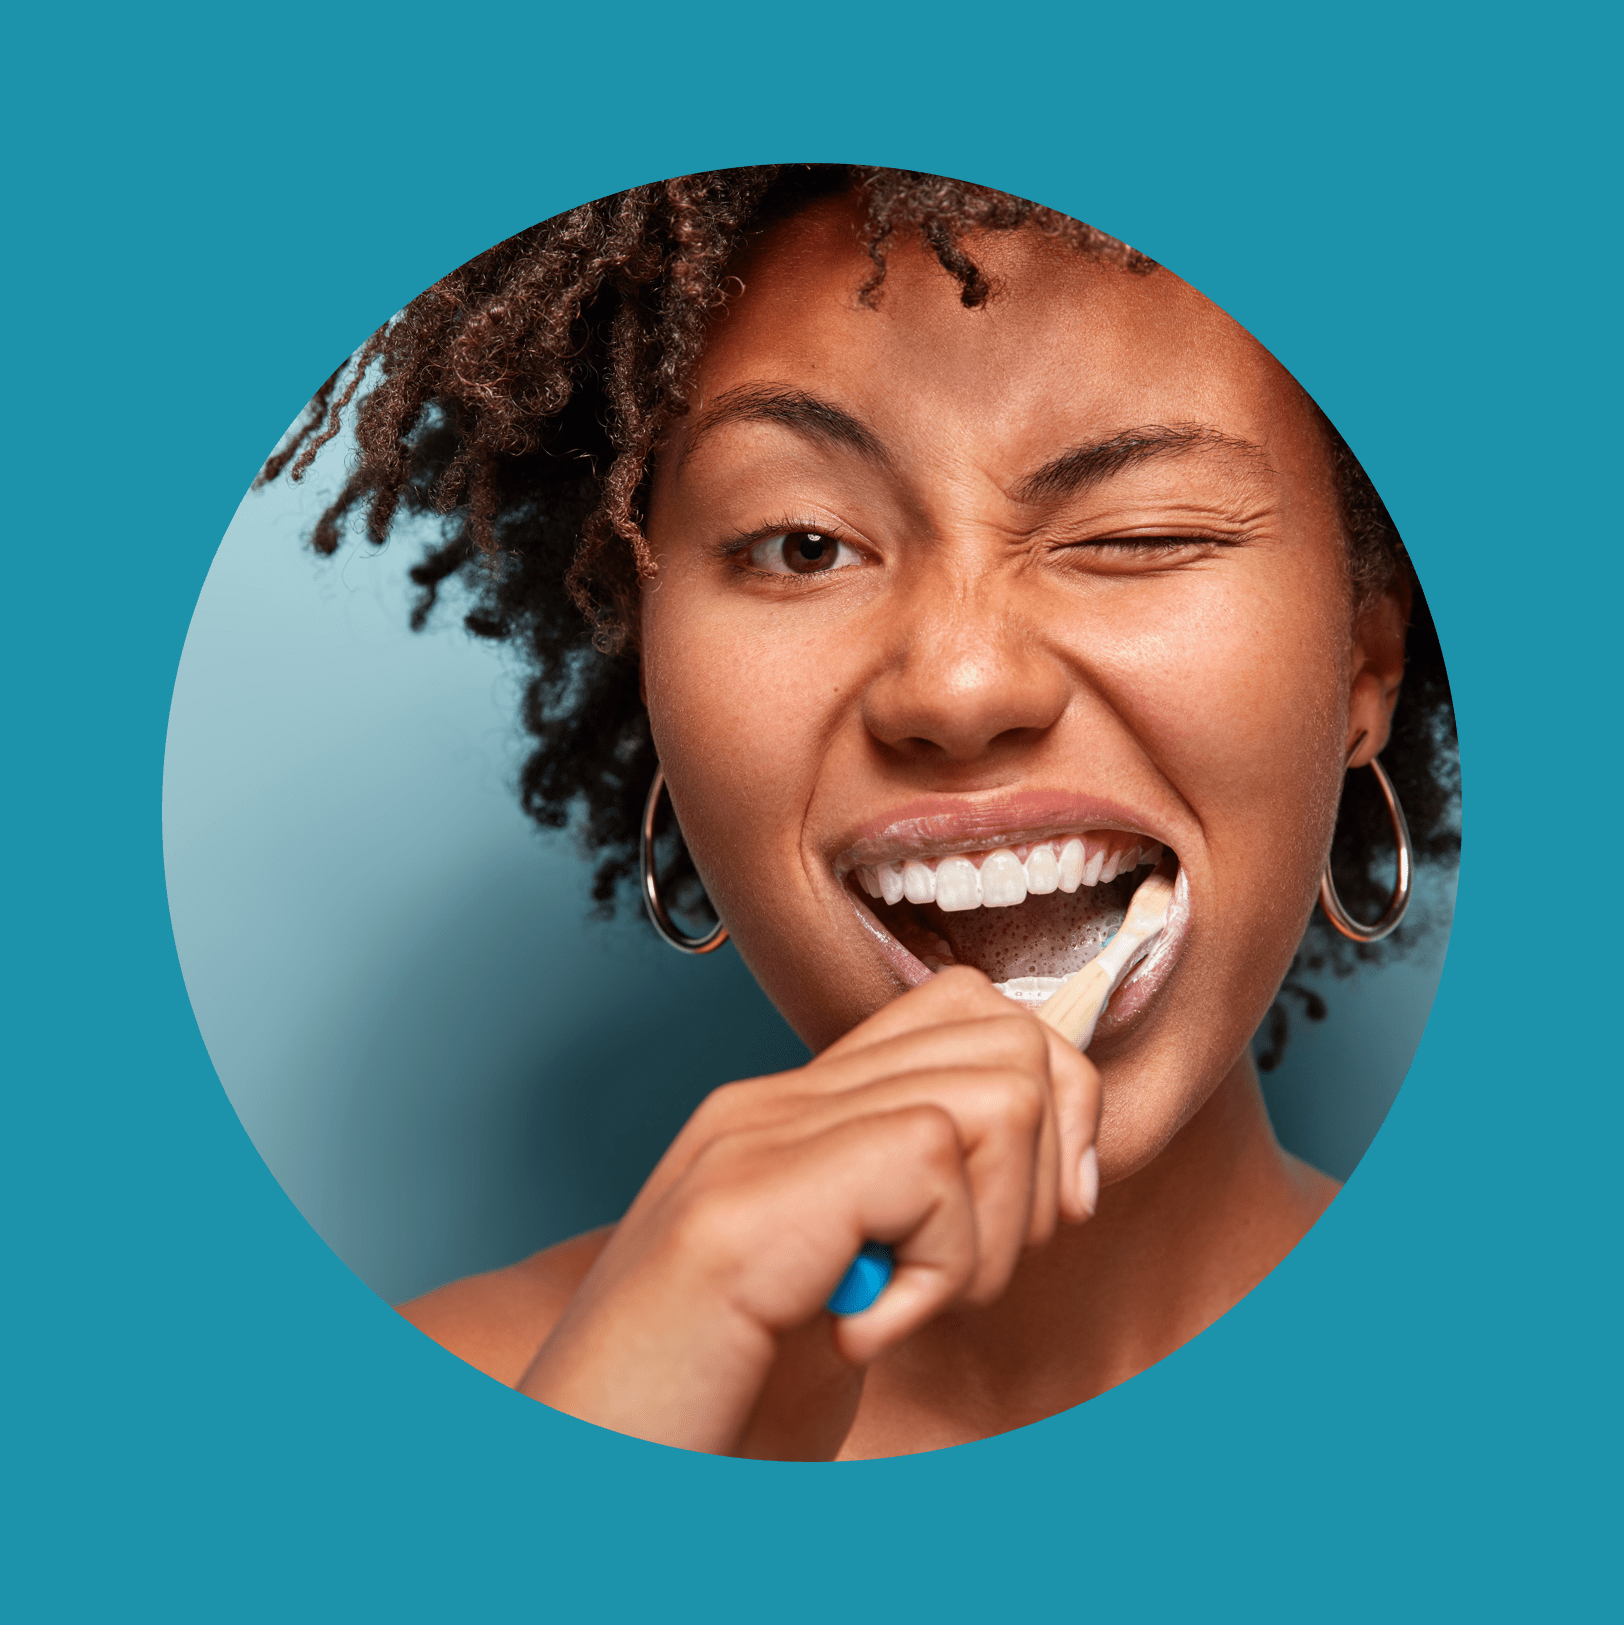 Tooth care concept. Slim naked young woman blinks eye, has daily routine after shower, brushes teeth with tootbrush, has healthy skin, isolated over blue background, free space for your promotion.